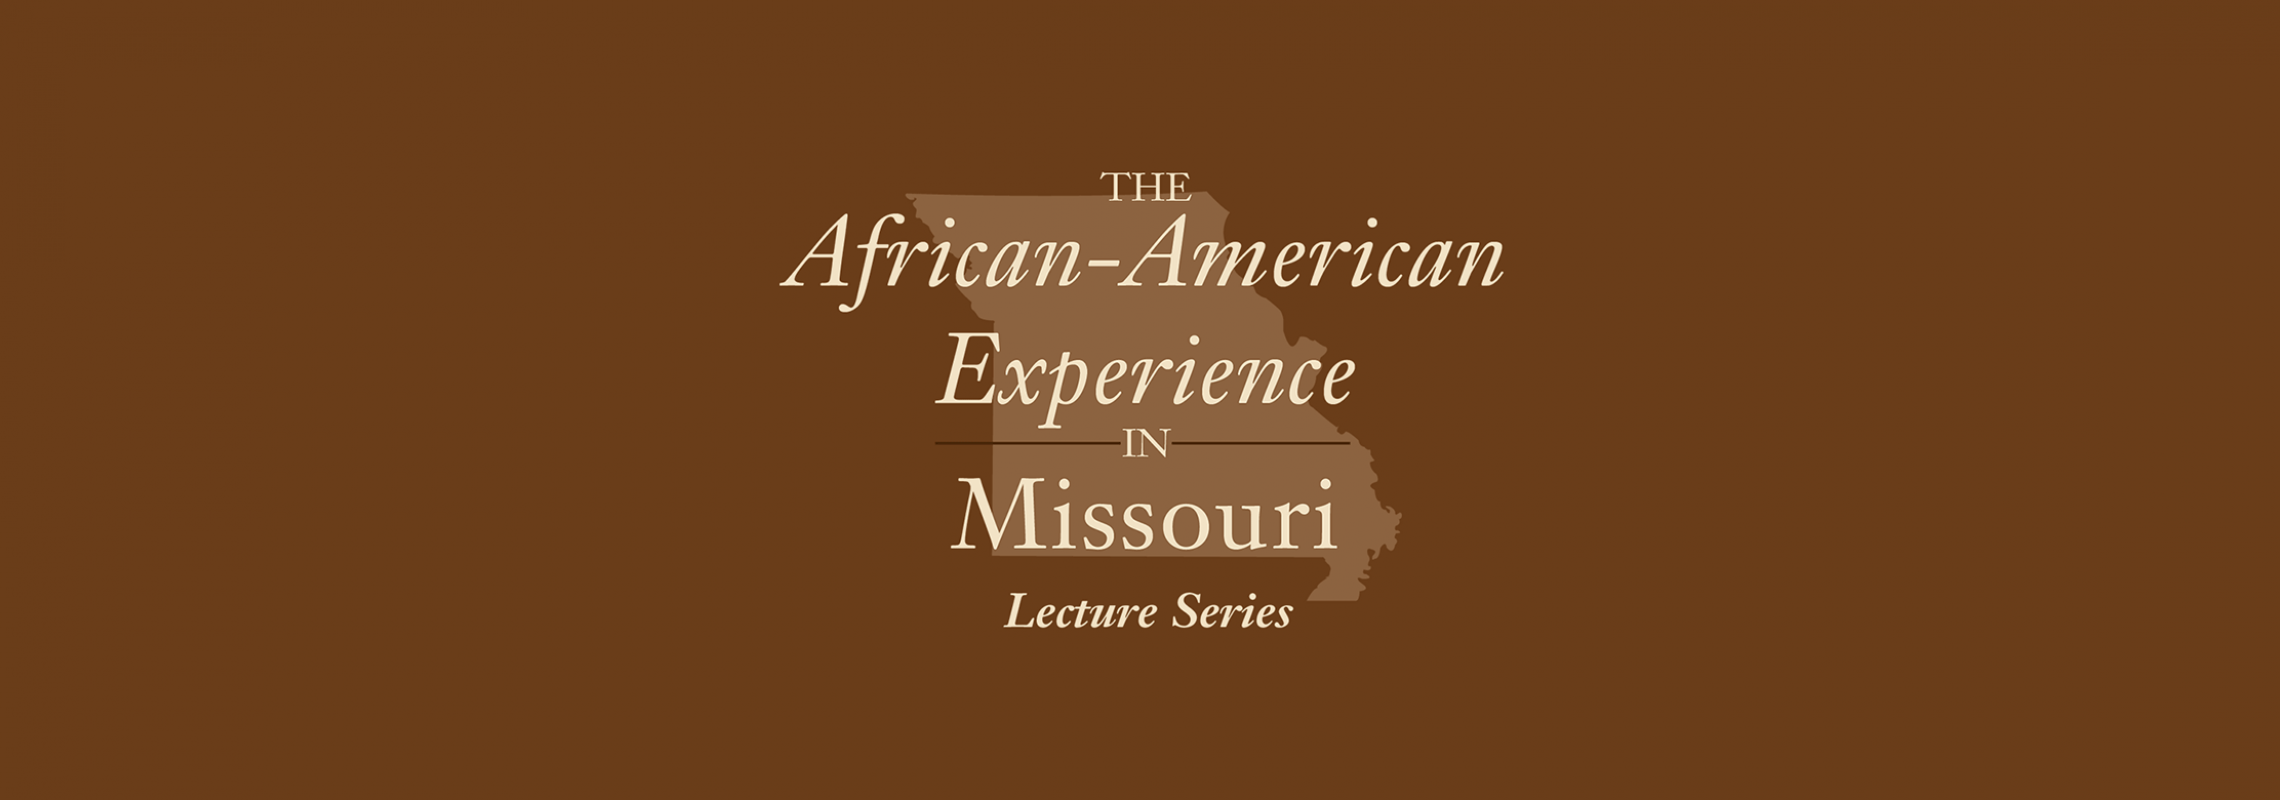 African American Experience in Missouri Lecture Series